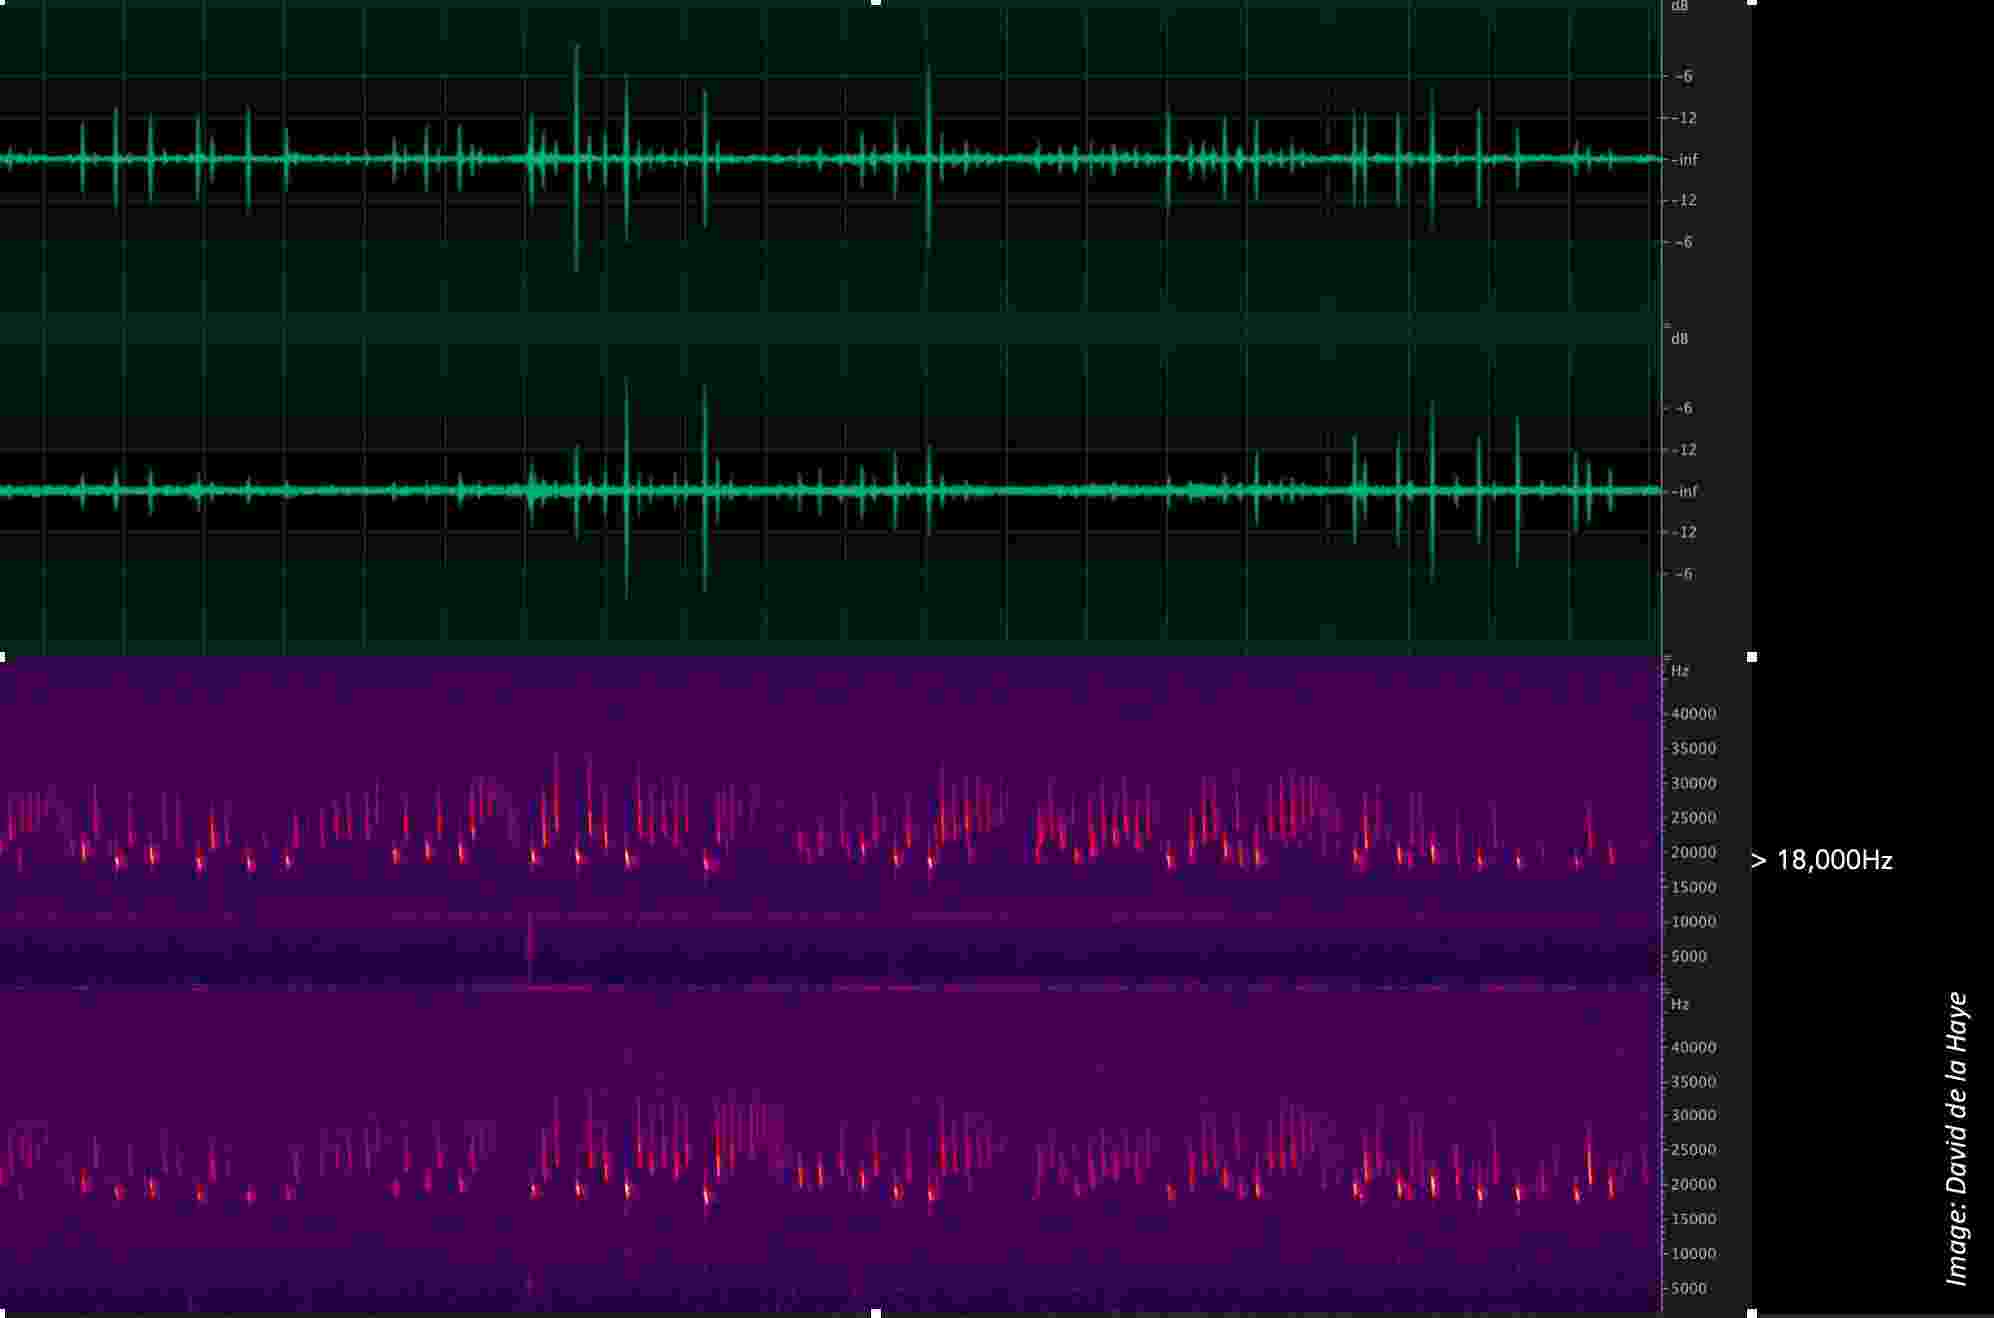 A screenshot of a spectrogram image, showing sound waves as they appear in computer audio editing software